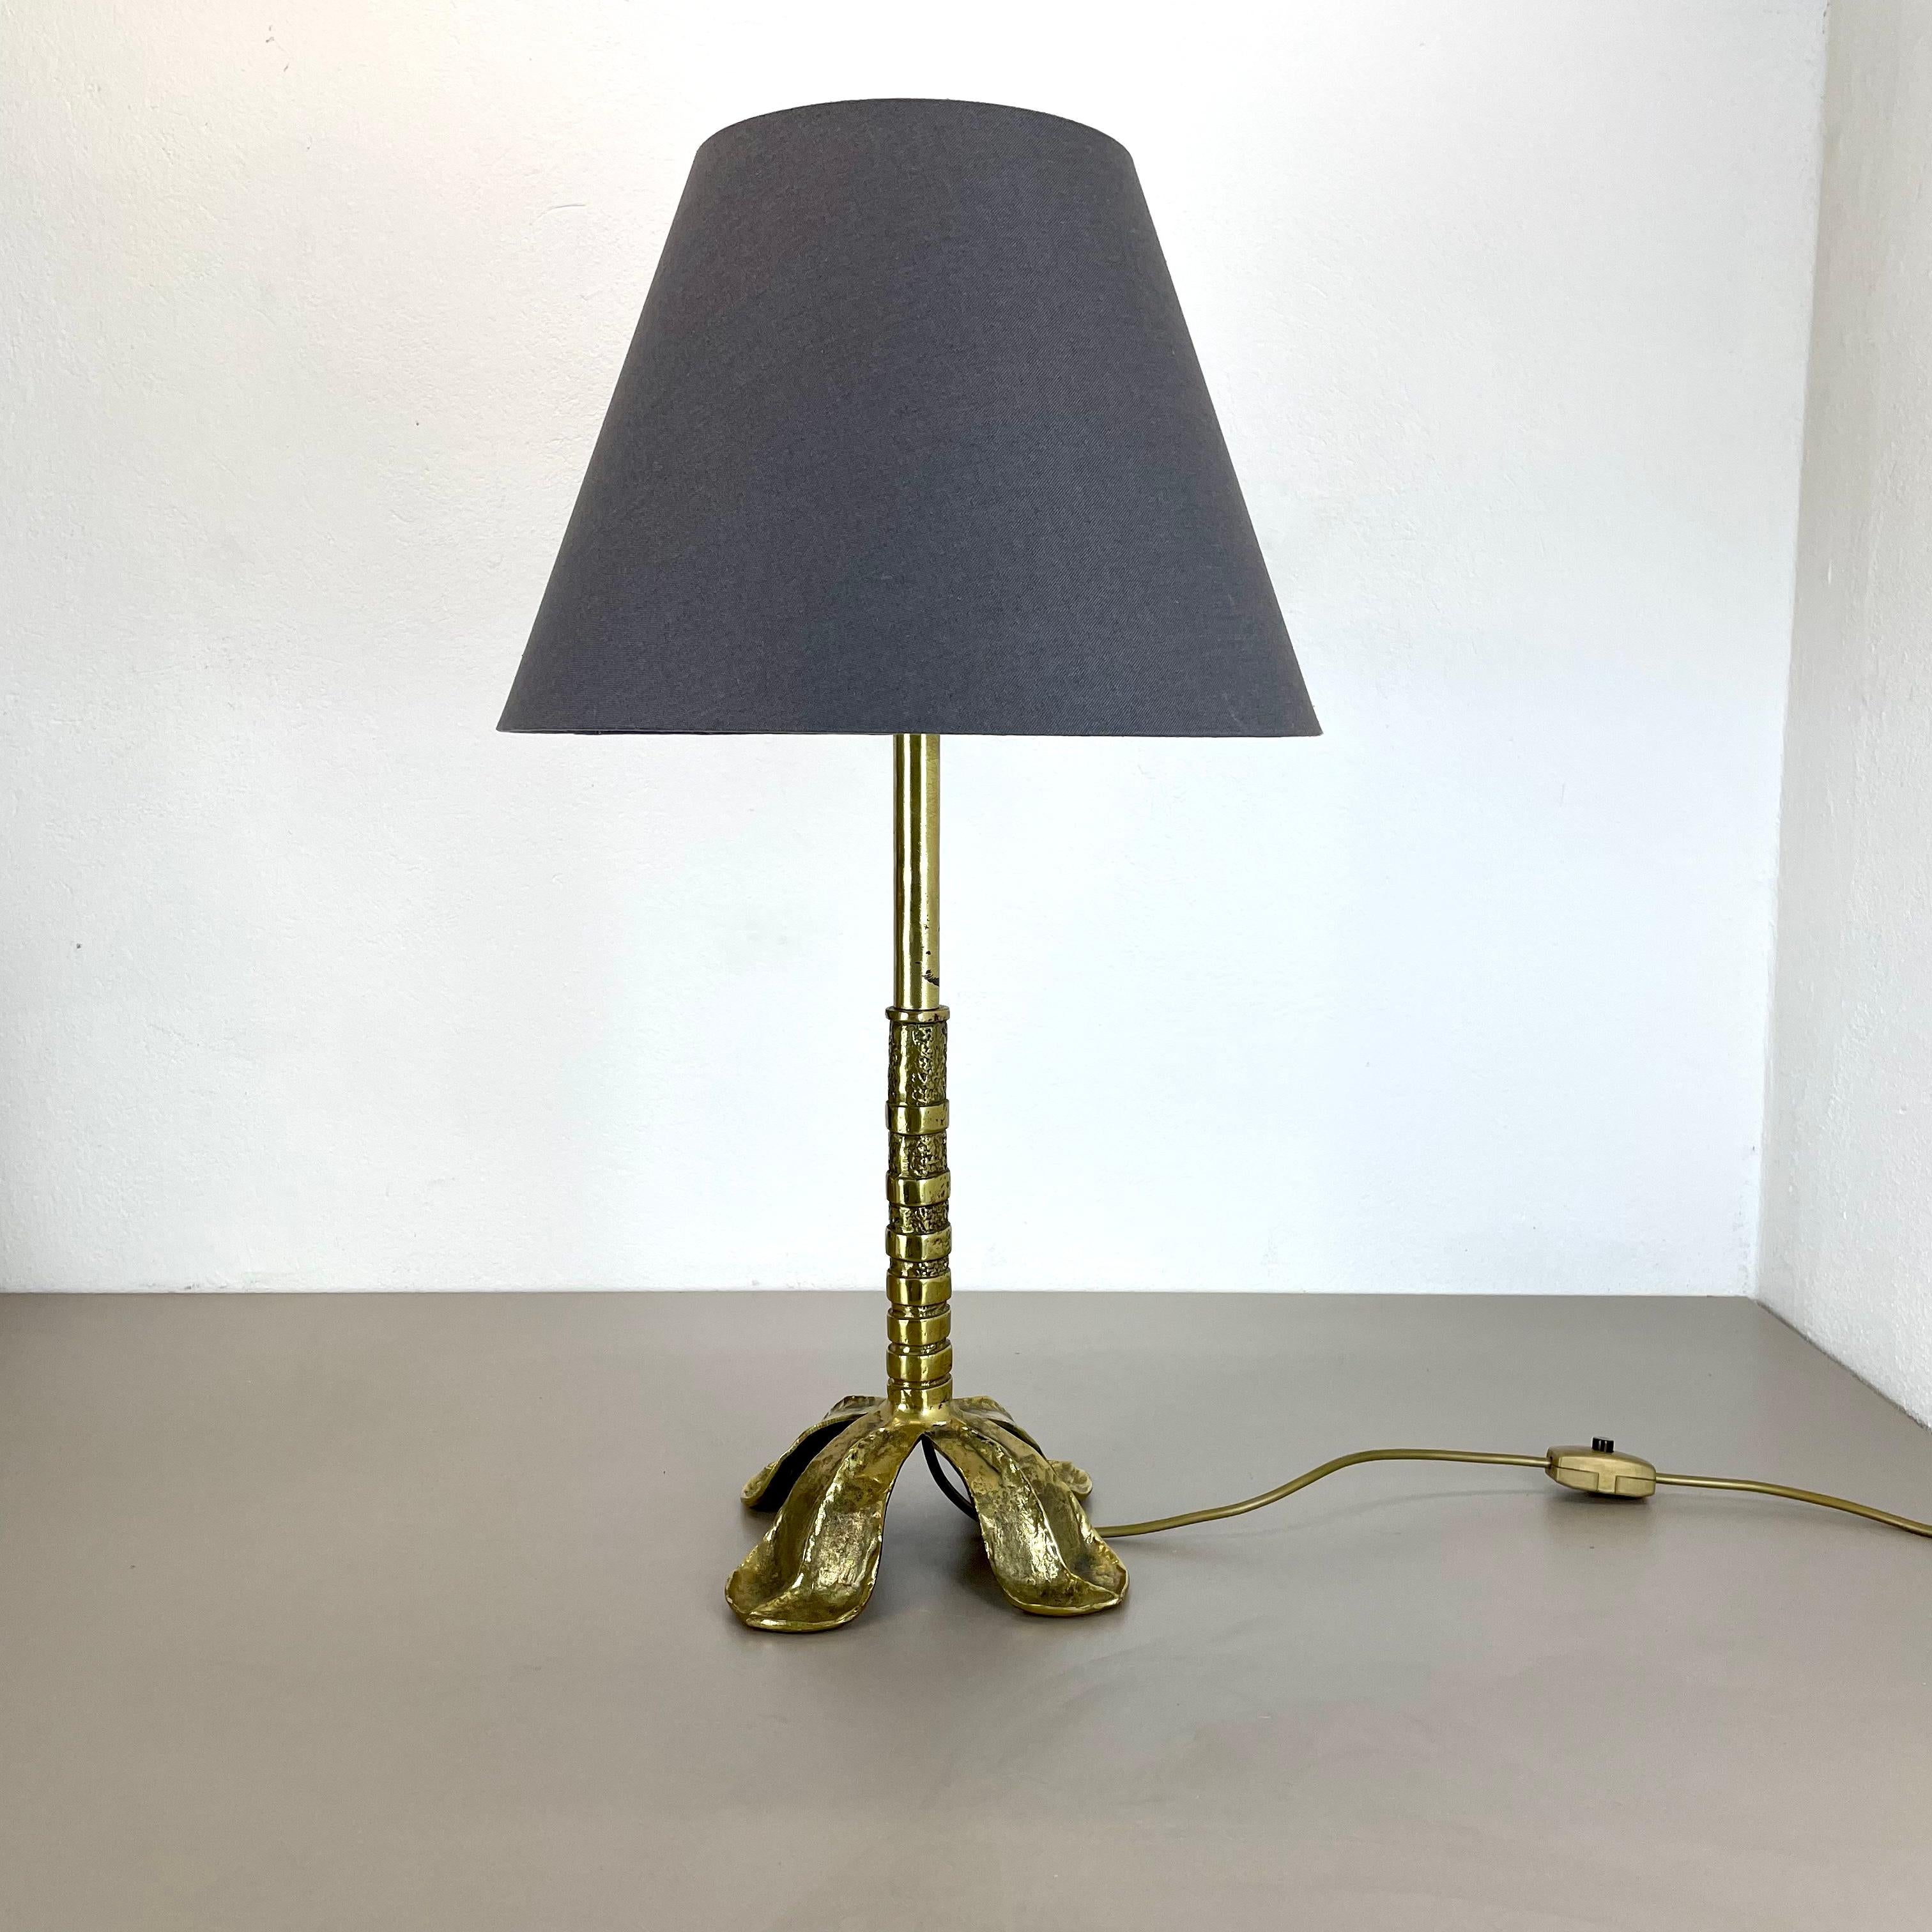 Article:

modernist brass table light base


Origin:

Italy


Decade:

1970s



This original vintage light was designed and produced in the 1970s in Italy. The light is made of brass and has a floral Brutalist shaped form. The light